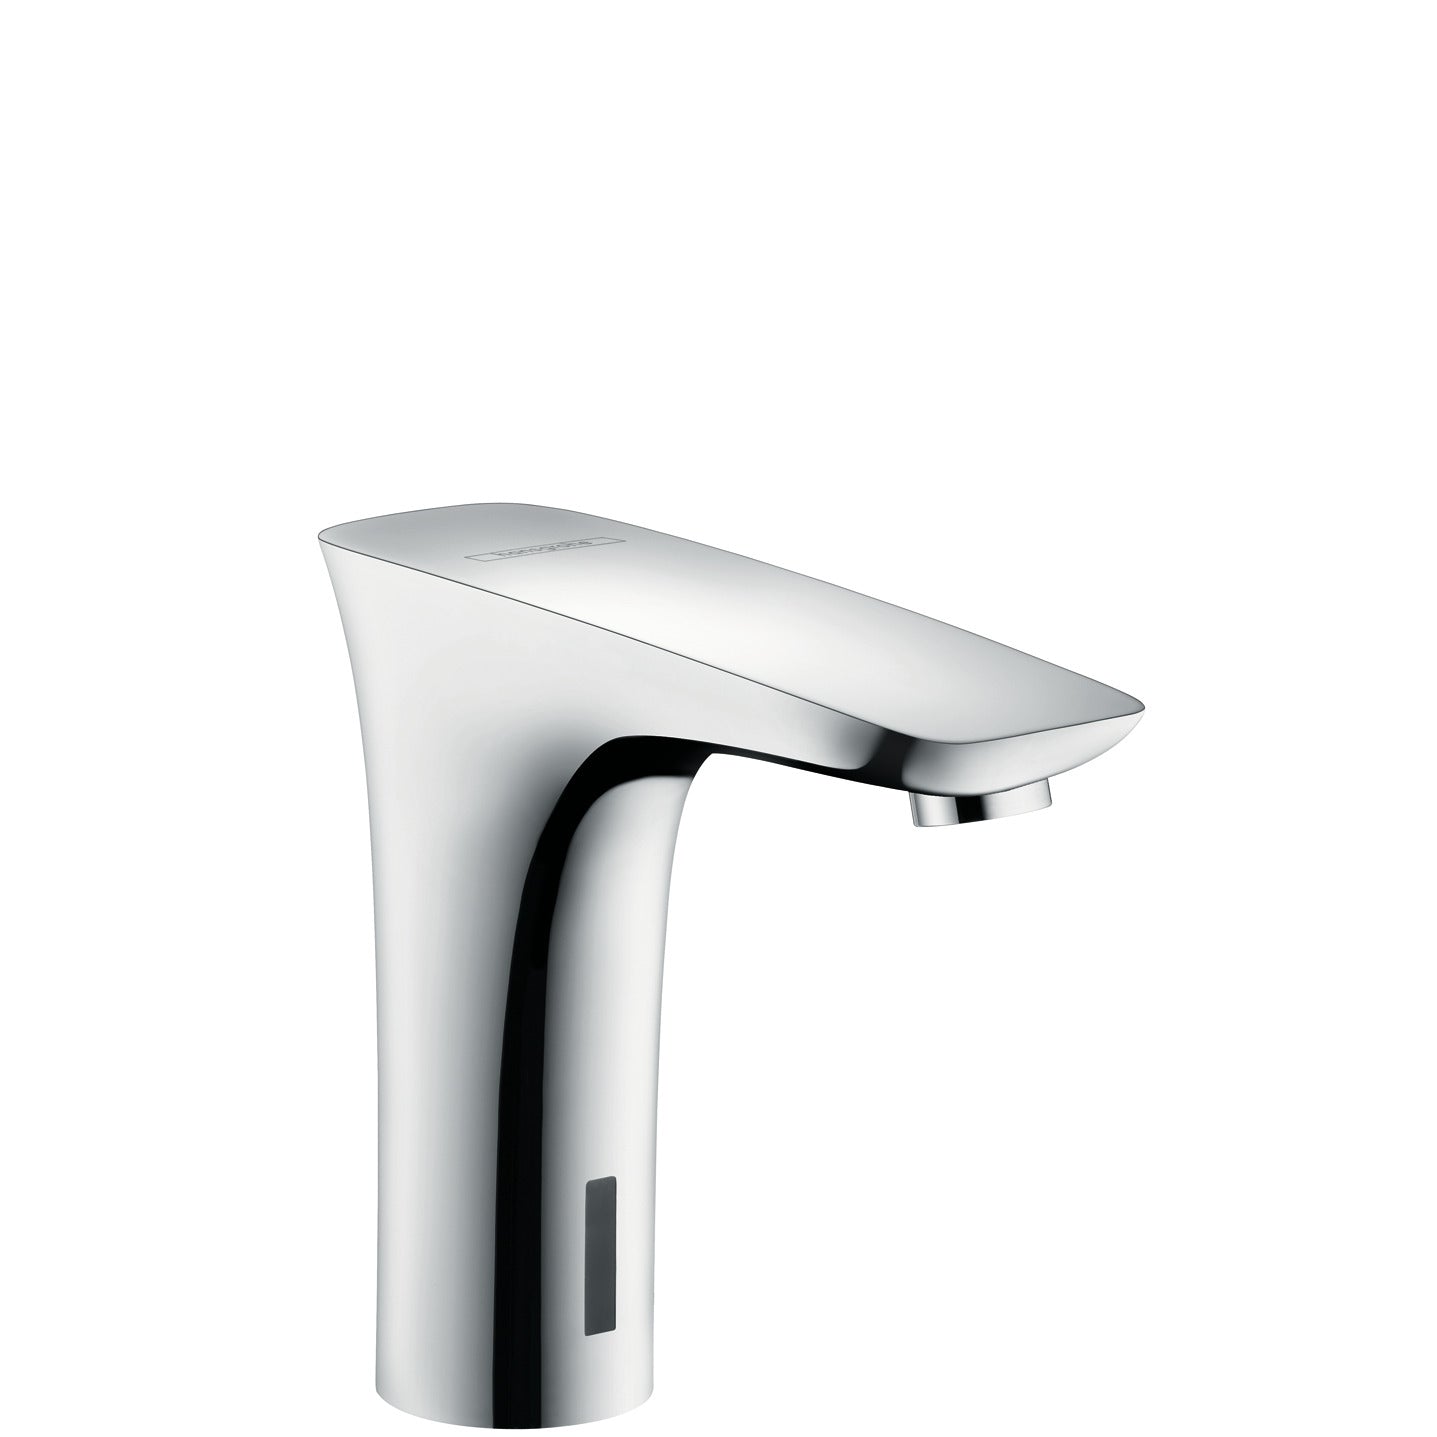 HANSGROHE 15171001 PuraVida Electronic Faucet with Preset Temperature Control in Chrome